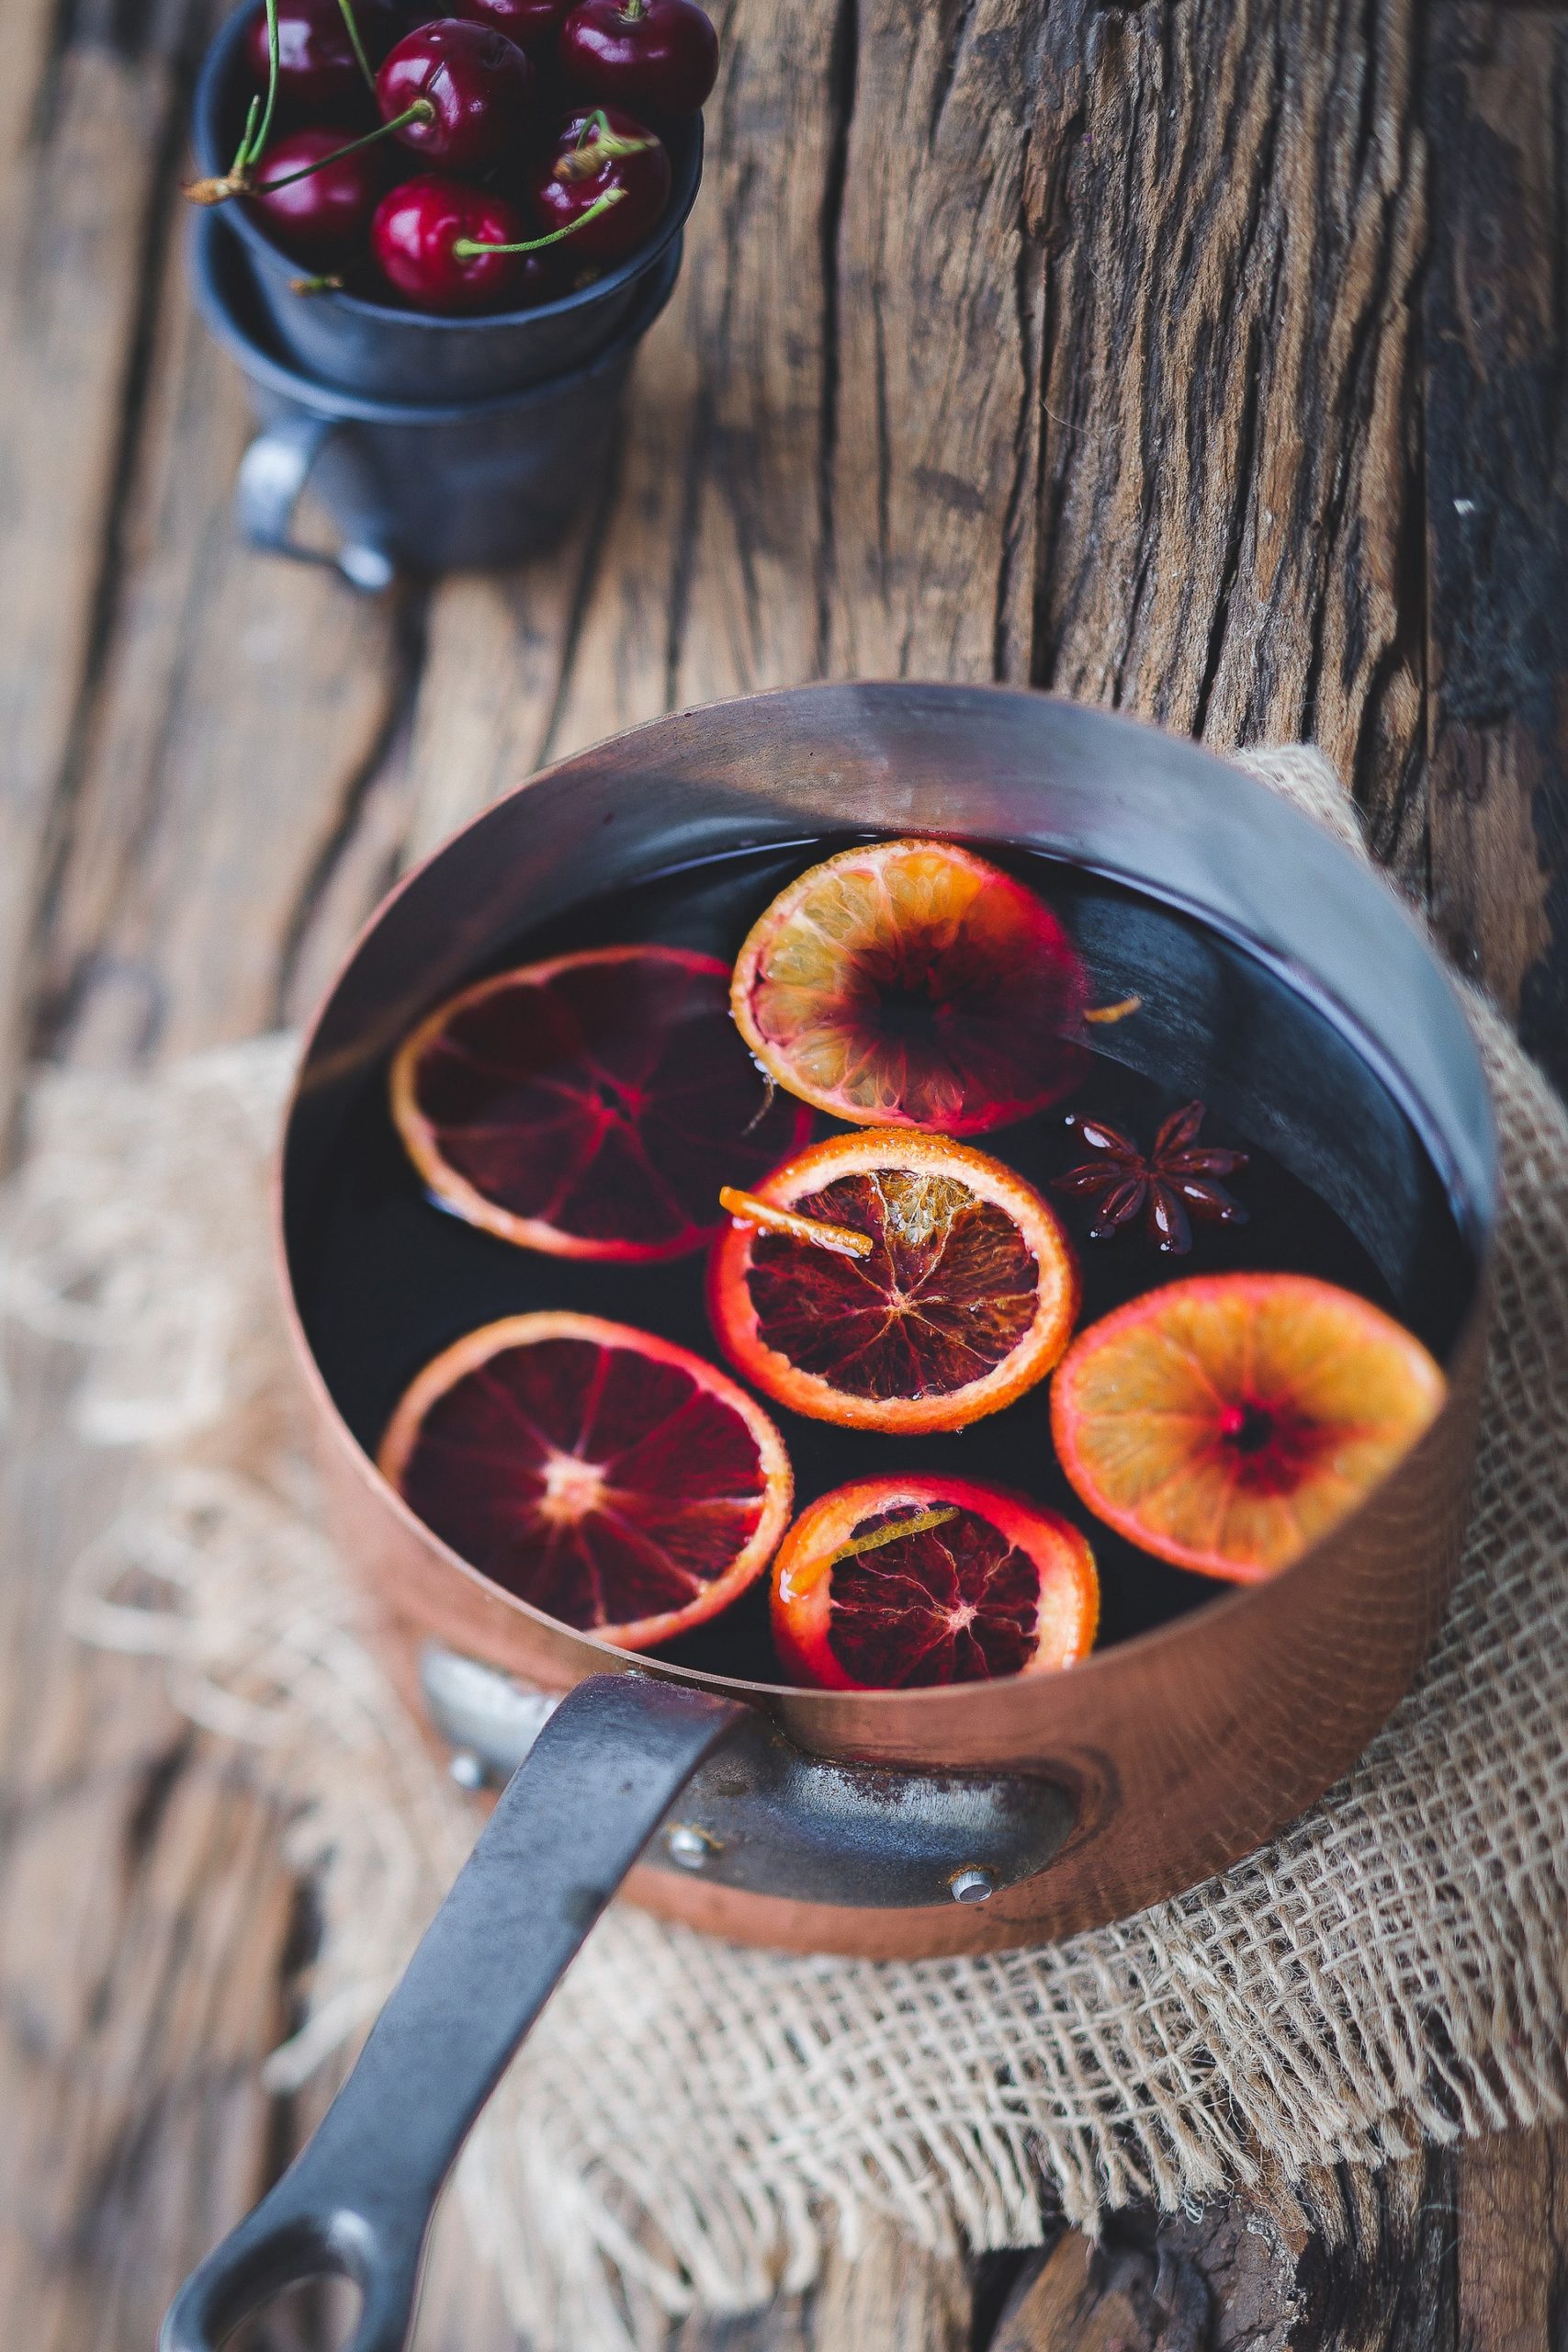 A pot of hot German non-alcoholic Christmas Punch (Kinderpunsch) with oranges and cinnamon sticks.